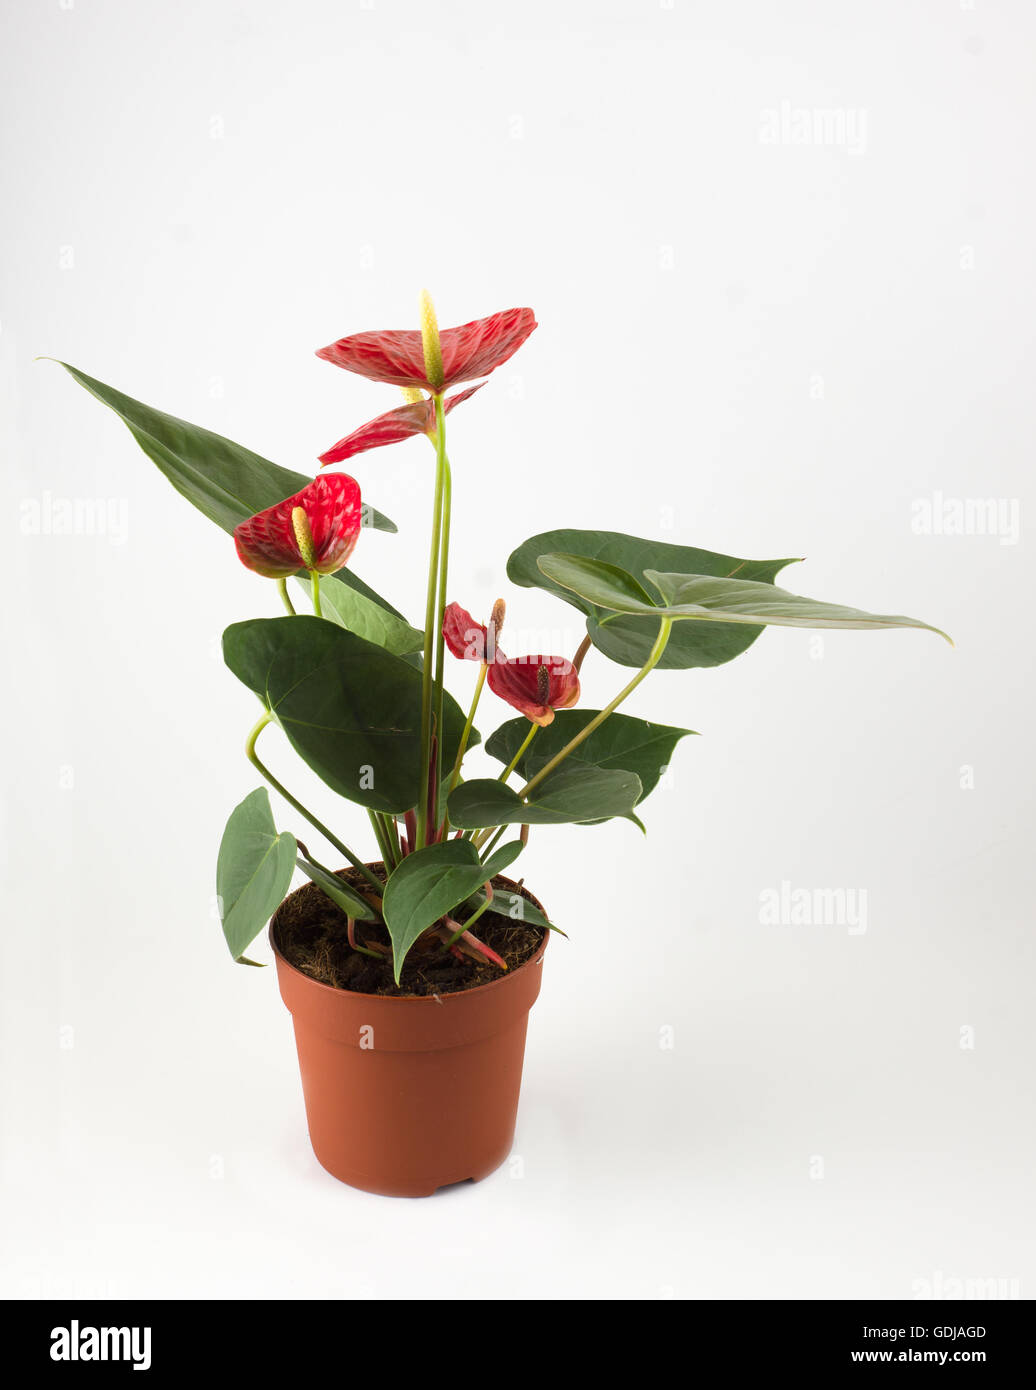 Anthurium a flowering plant with beautiful flowers on a white background Stock Photo